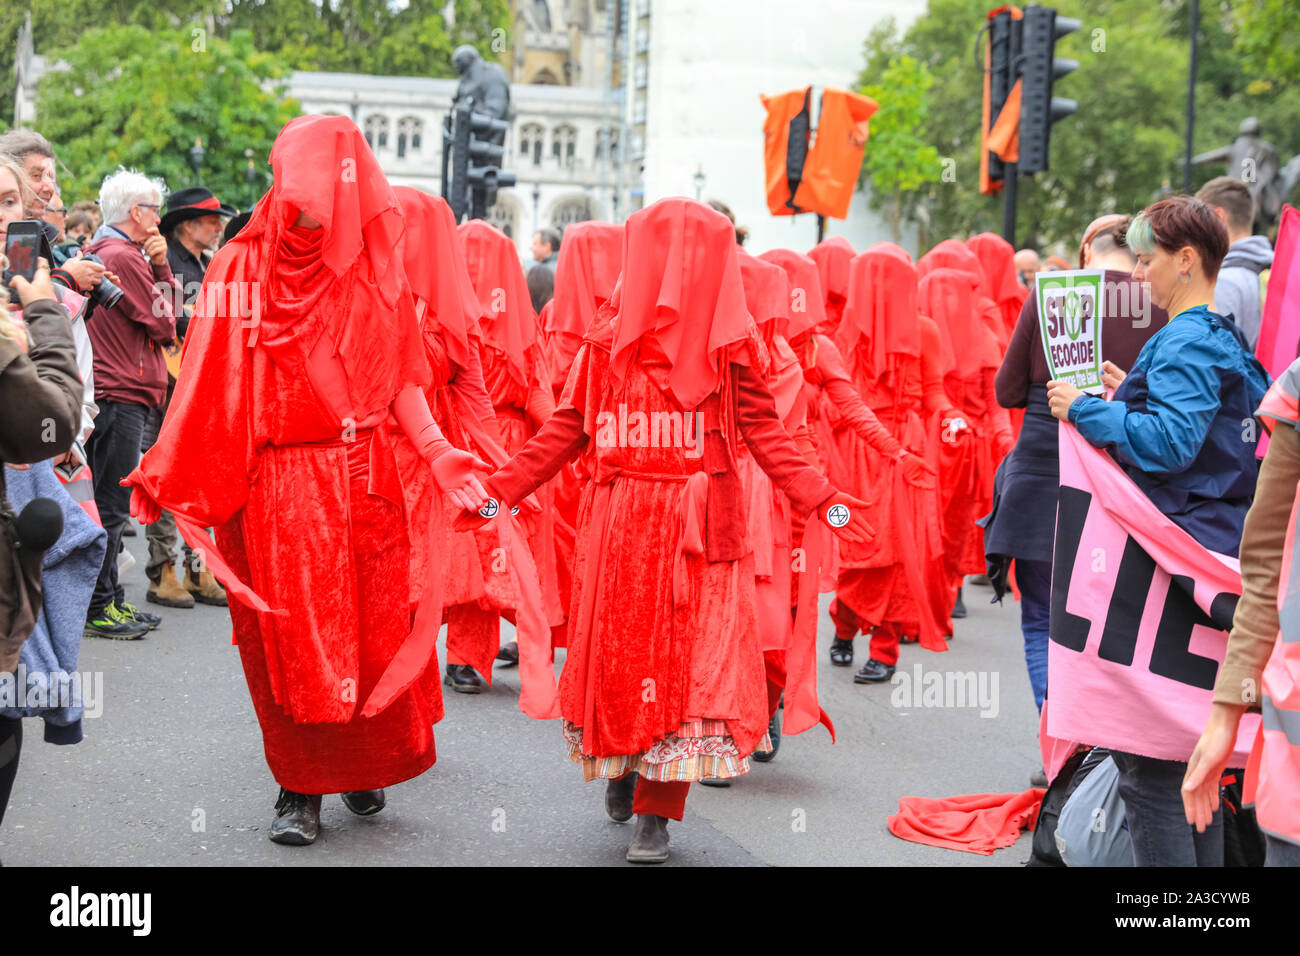 London, UK. 07th Oct, 2019. The Red Brigade in their blood red outfits once again make an appearance. Climate activists from Extinction Rebellion have staged a number of protests at various sites in Westminster, including Bridges and several government ministries, to raise awareness on global climate emergency issues. Credit: Imageplotter/Alamy Live News Stock Photo